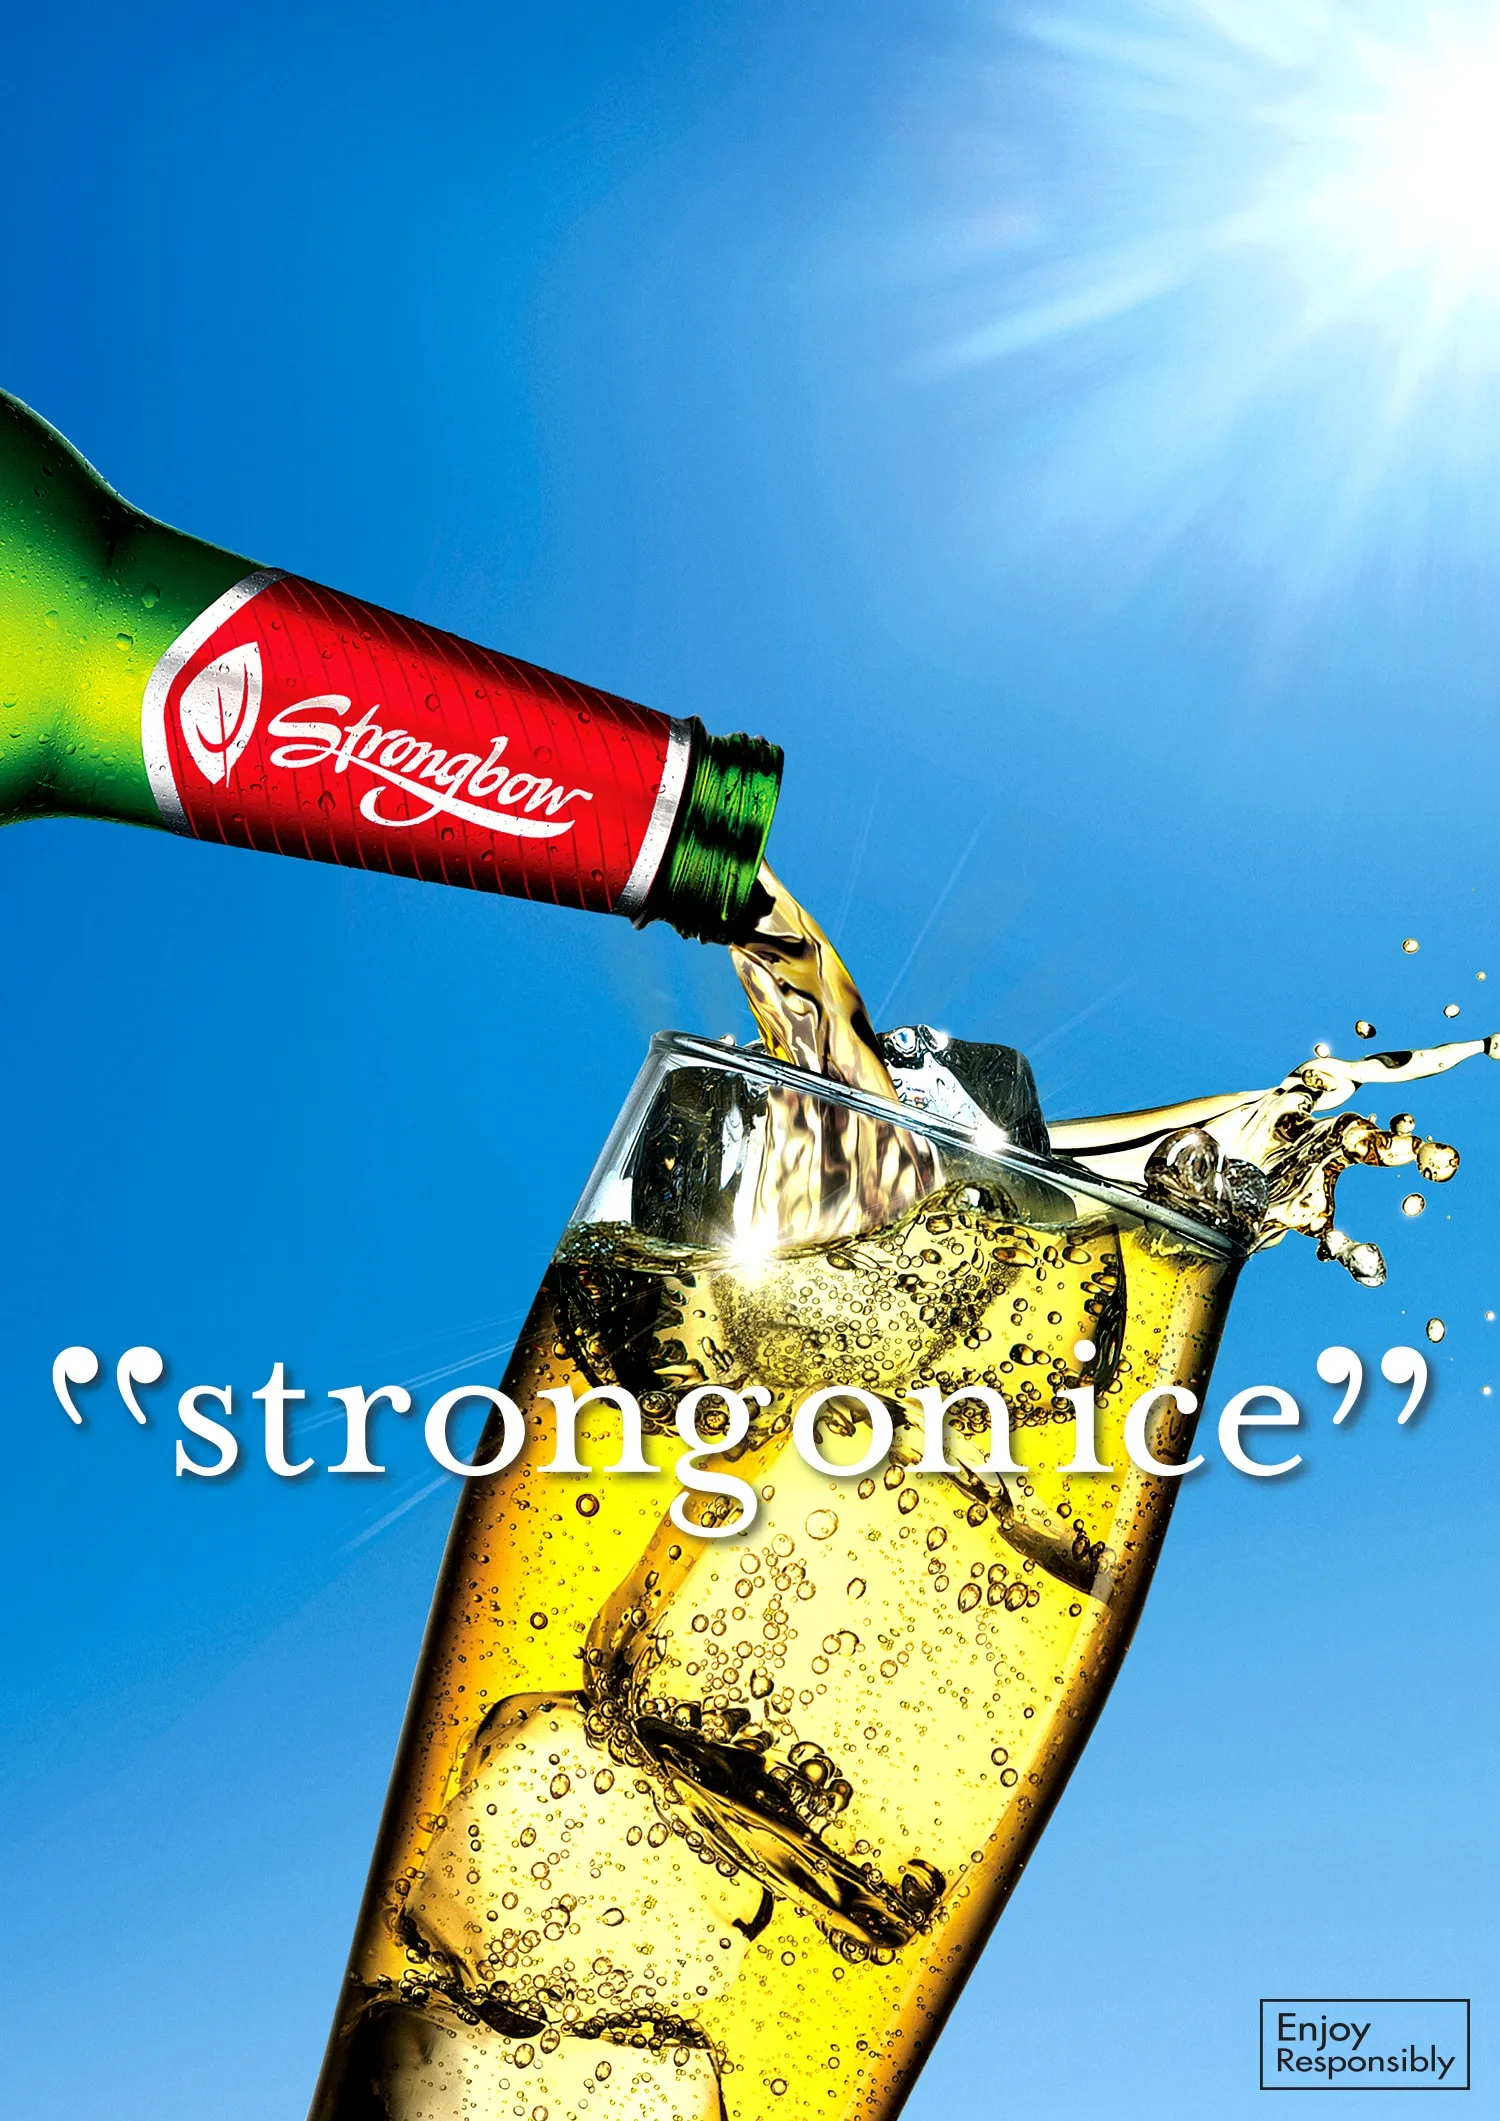 An outdoor poster for Strongbow that says "Strong on ice" and shows cider being poured into a glass in summer